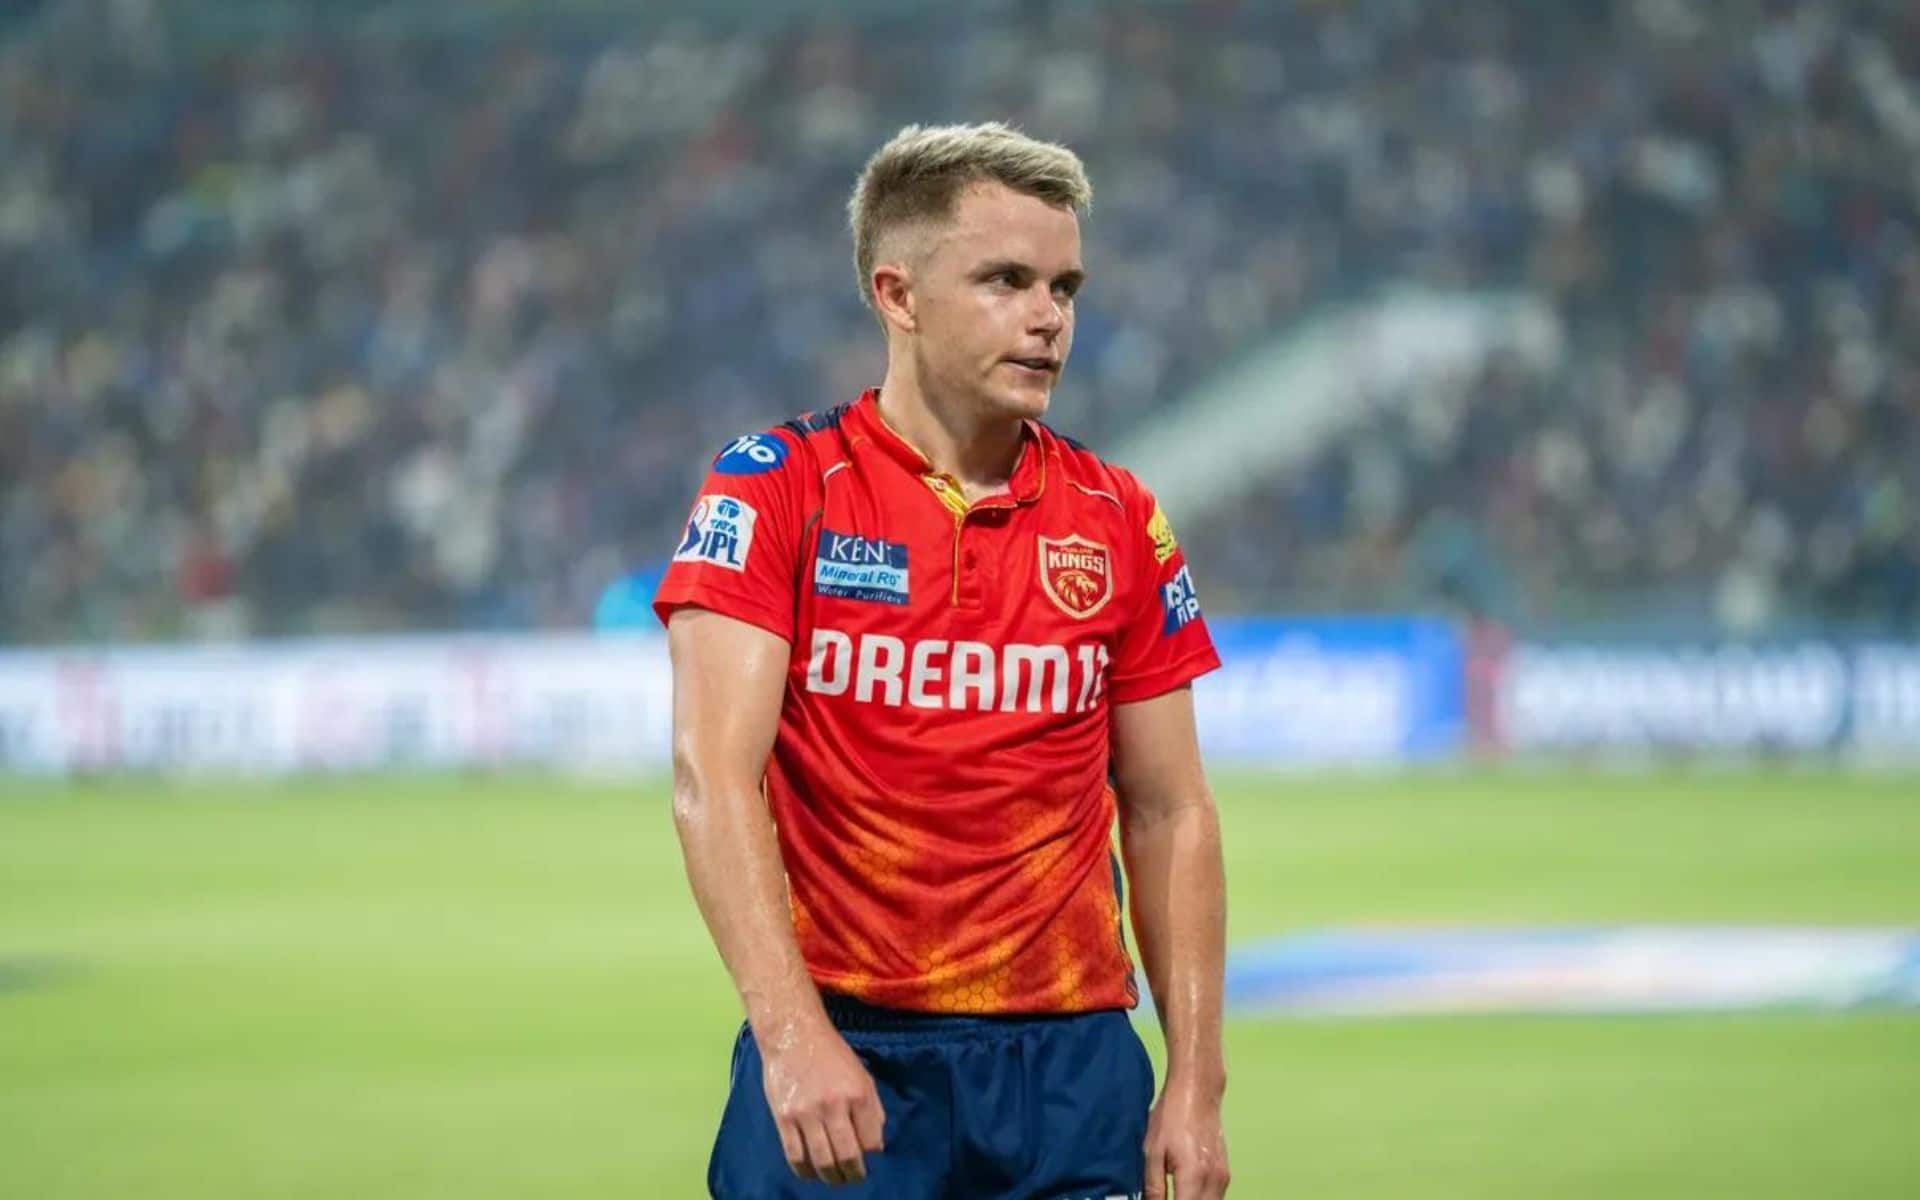 Sam Curran could prove to be a decisive choice for the fantasy contests of this match [iplt20.com]